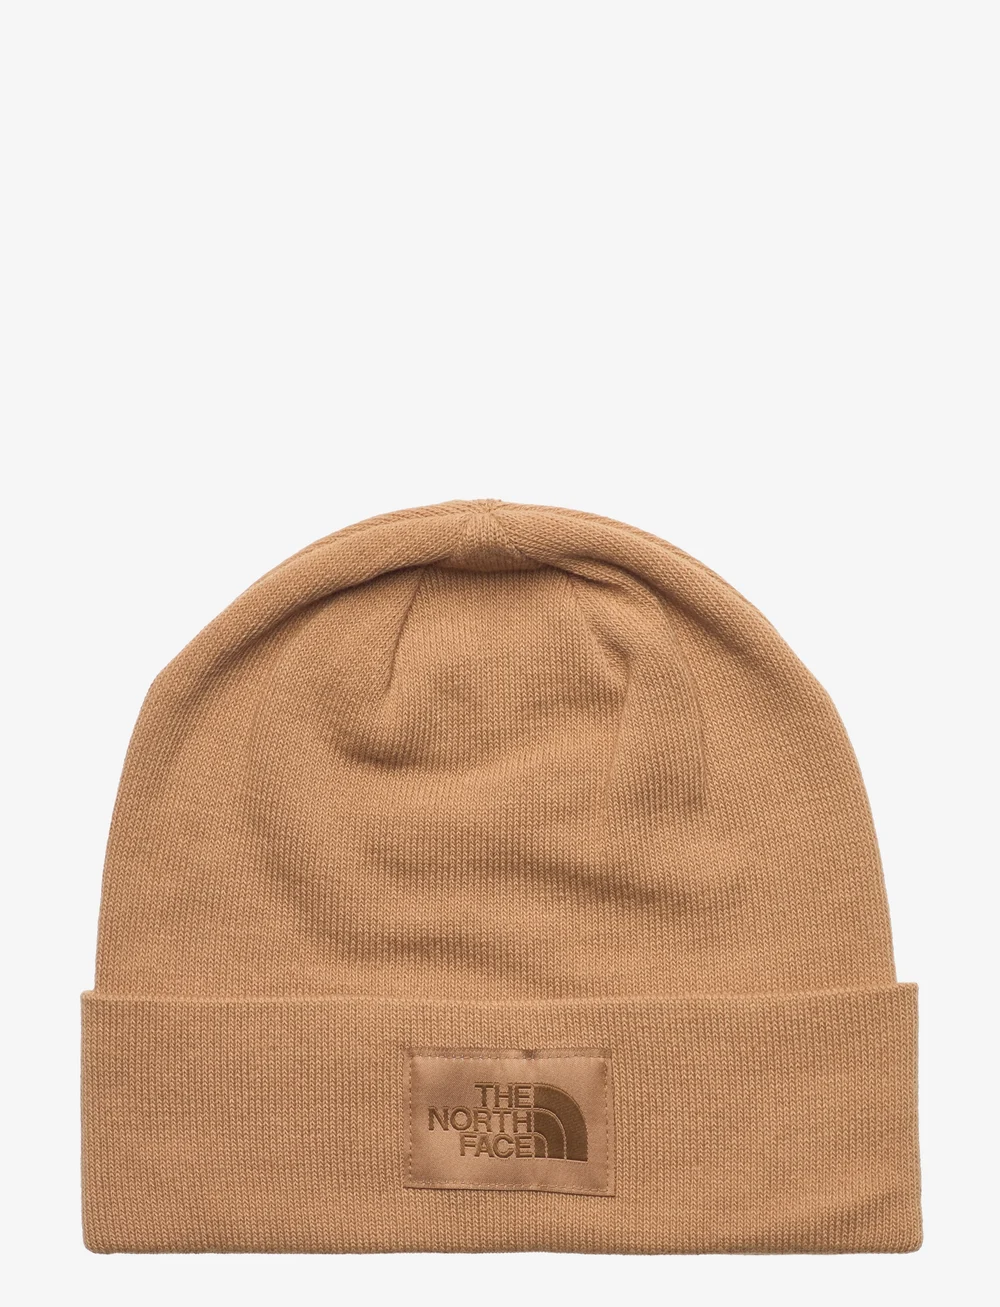 The North Face Dock Worker Recycled Beanie - Bonnets 